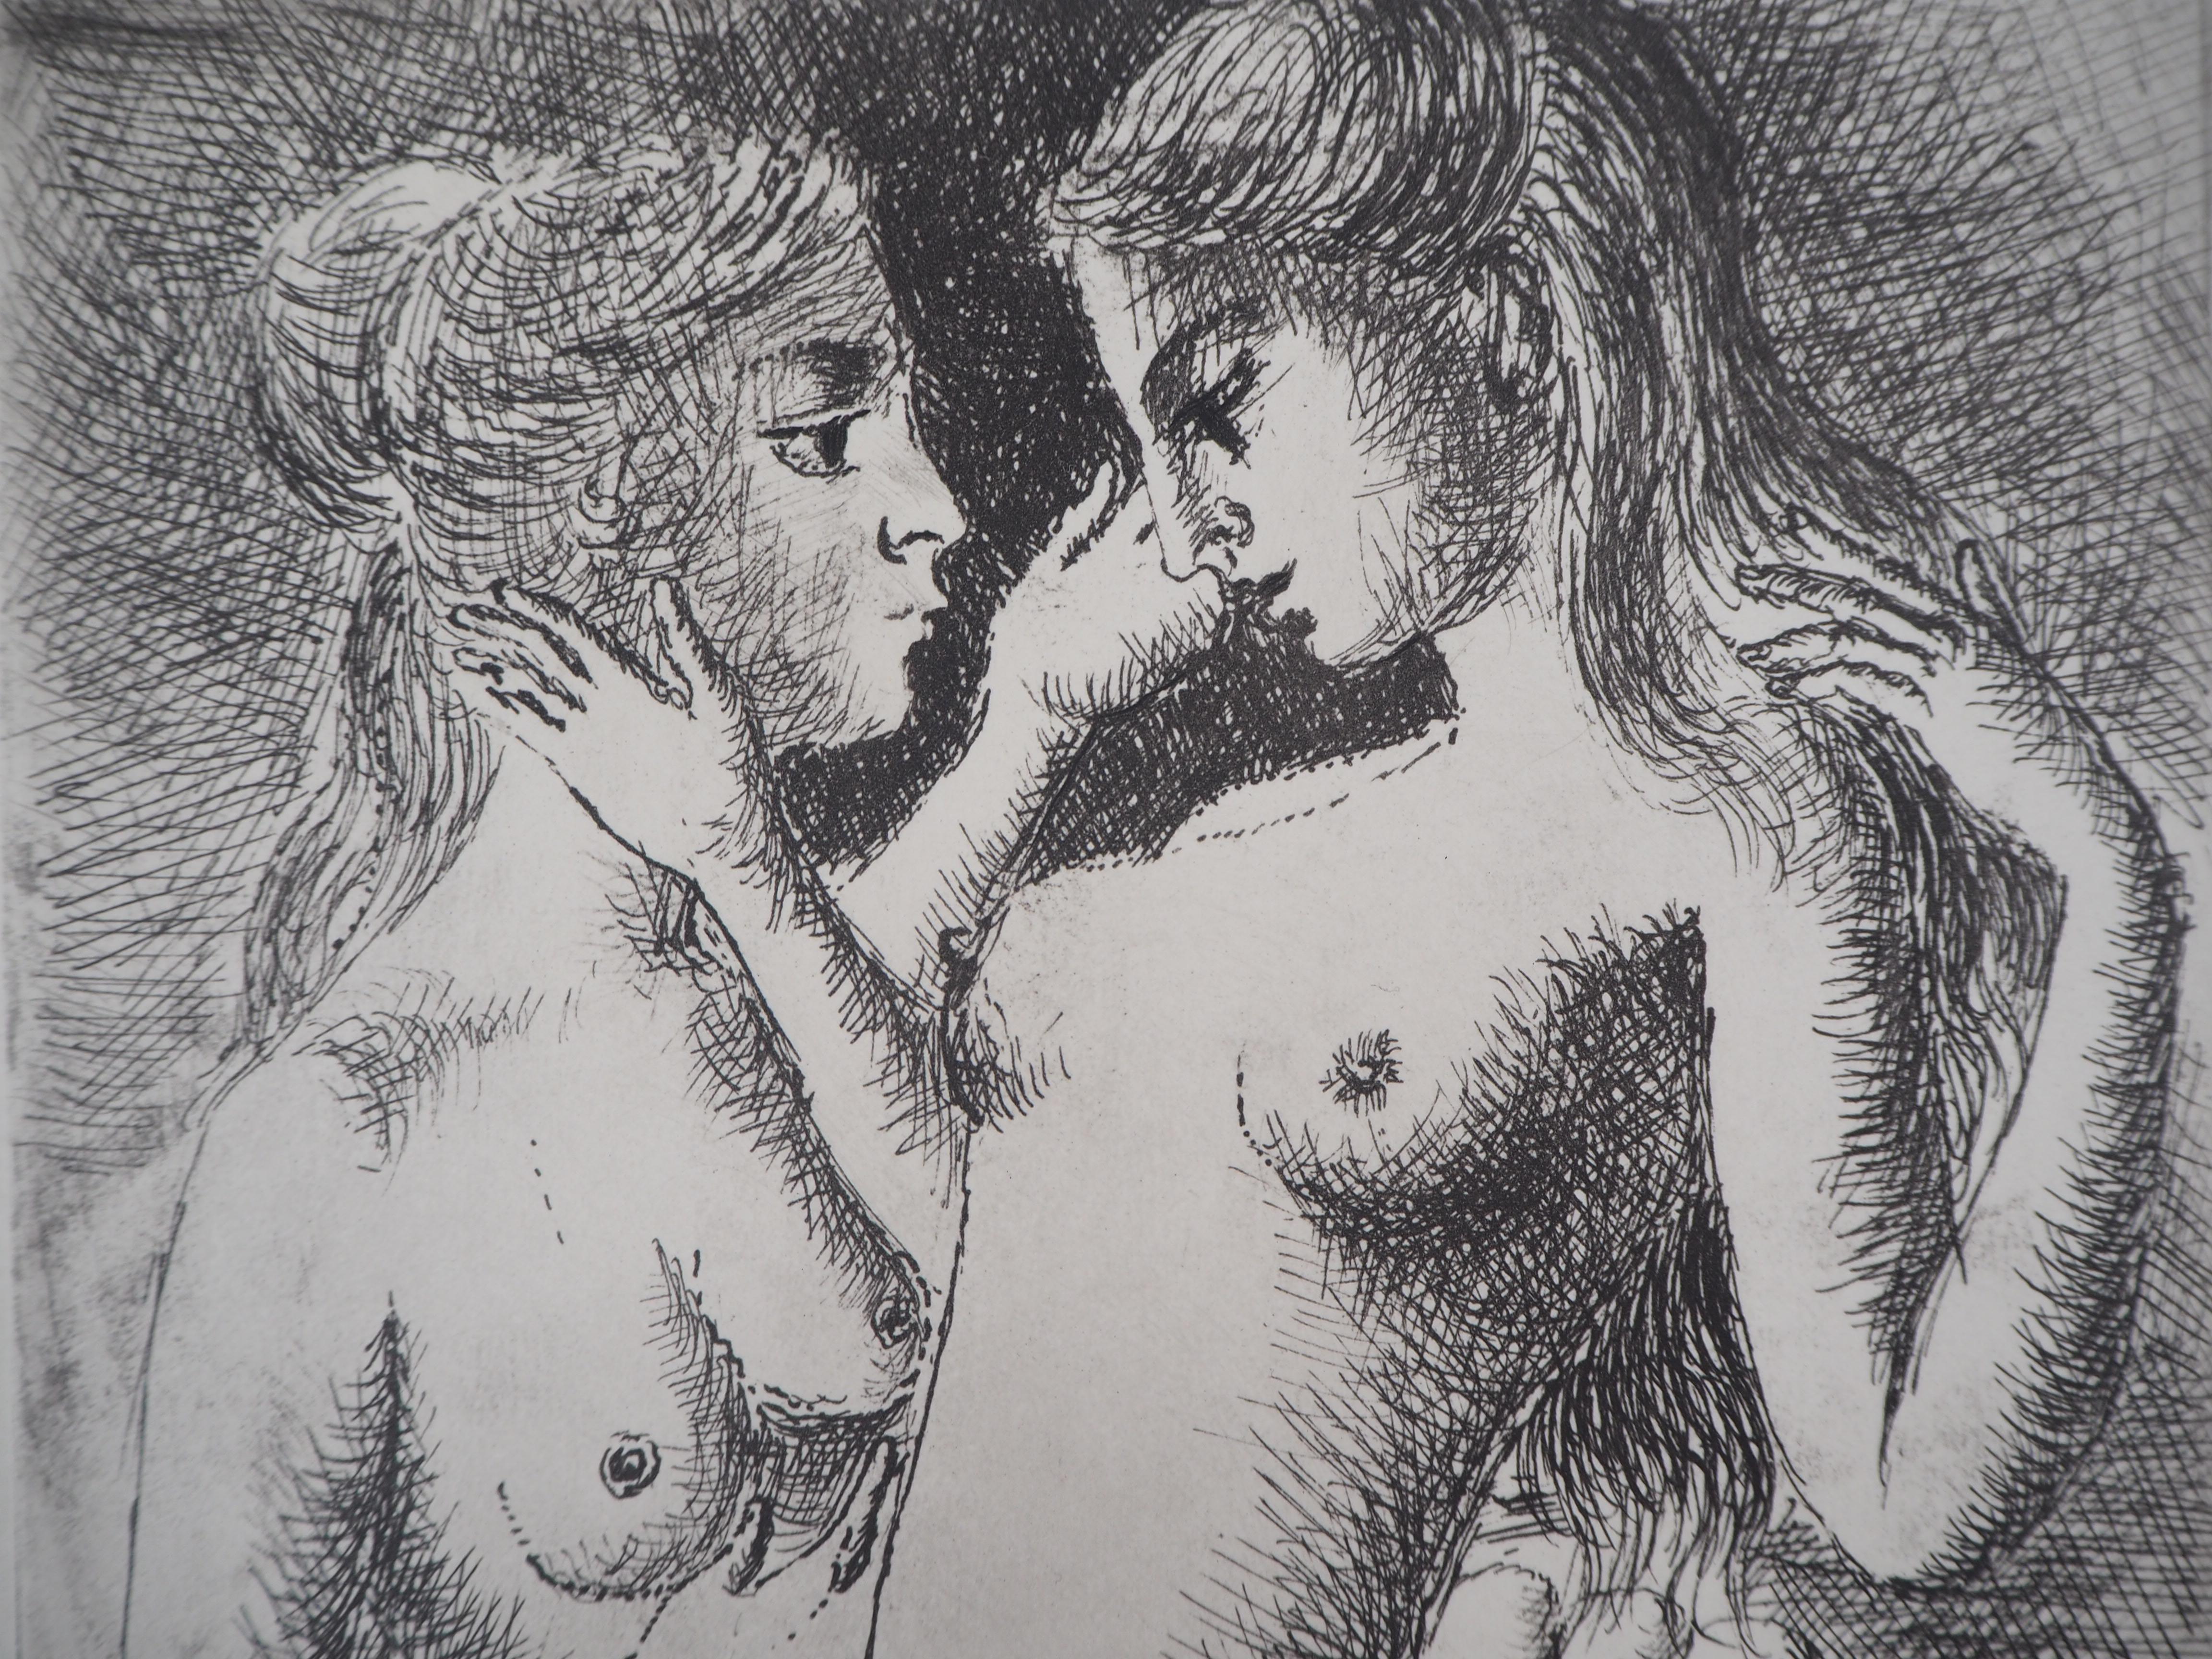 Paul DELVAUX
Muses, 1970

Engraving (Georges Leblanc workshop)
On vellum applied on vellum 32 x 24.5 cm (c. 12.6 x 9.4 inches)
Limited edition of 200 unnumbered copies

Very good condition